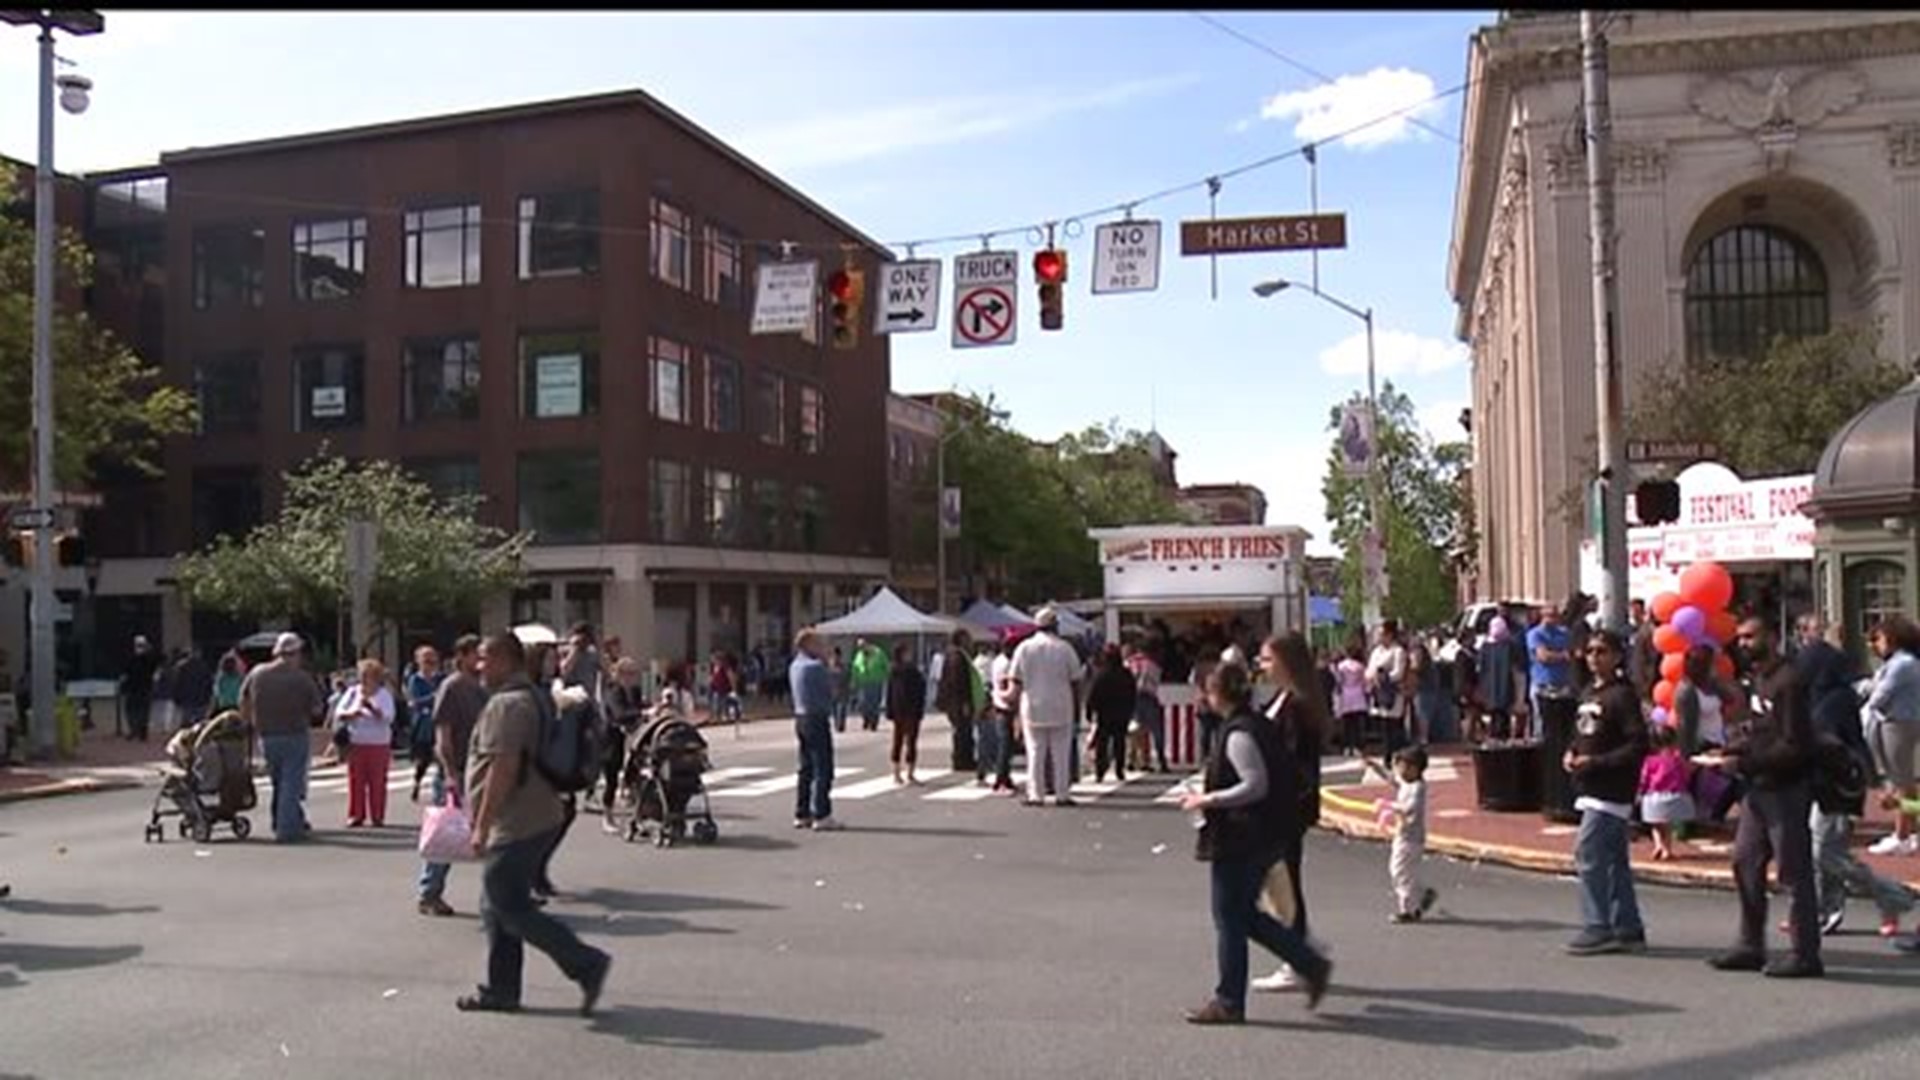 Olde York Street Fair brings thousands to downtown area